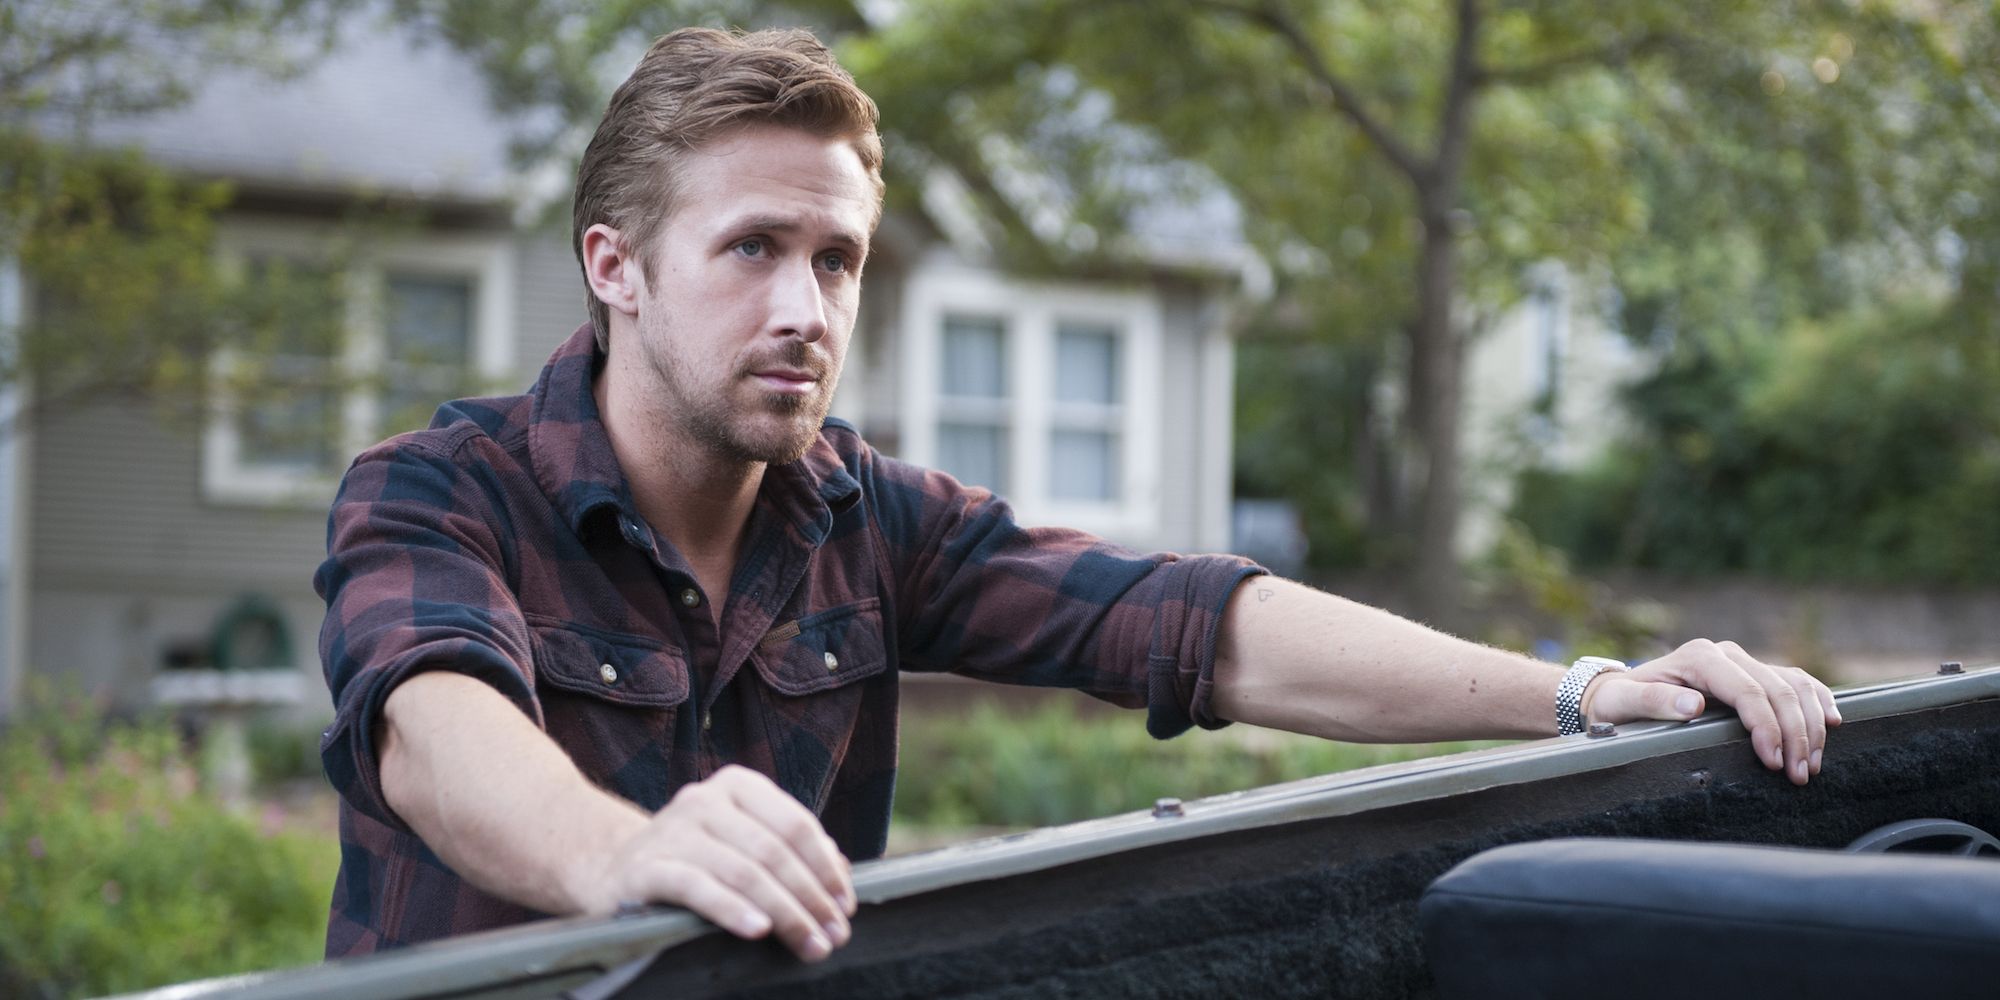 BV (Ryan Gosling) gripping the edge of a vehicle in Song to Song.